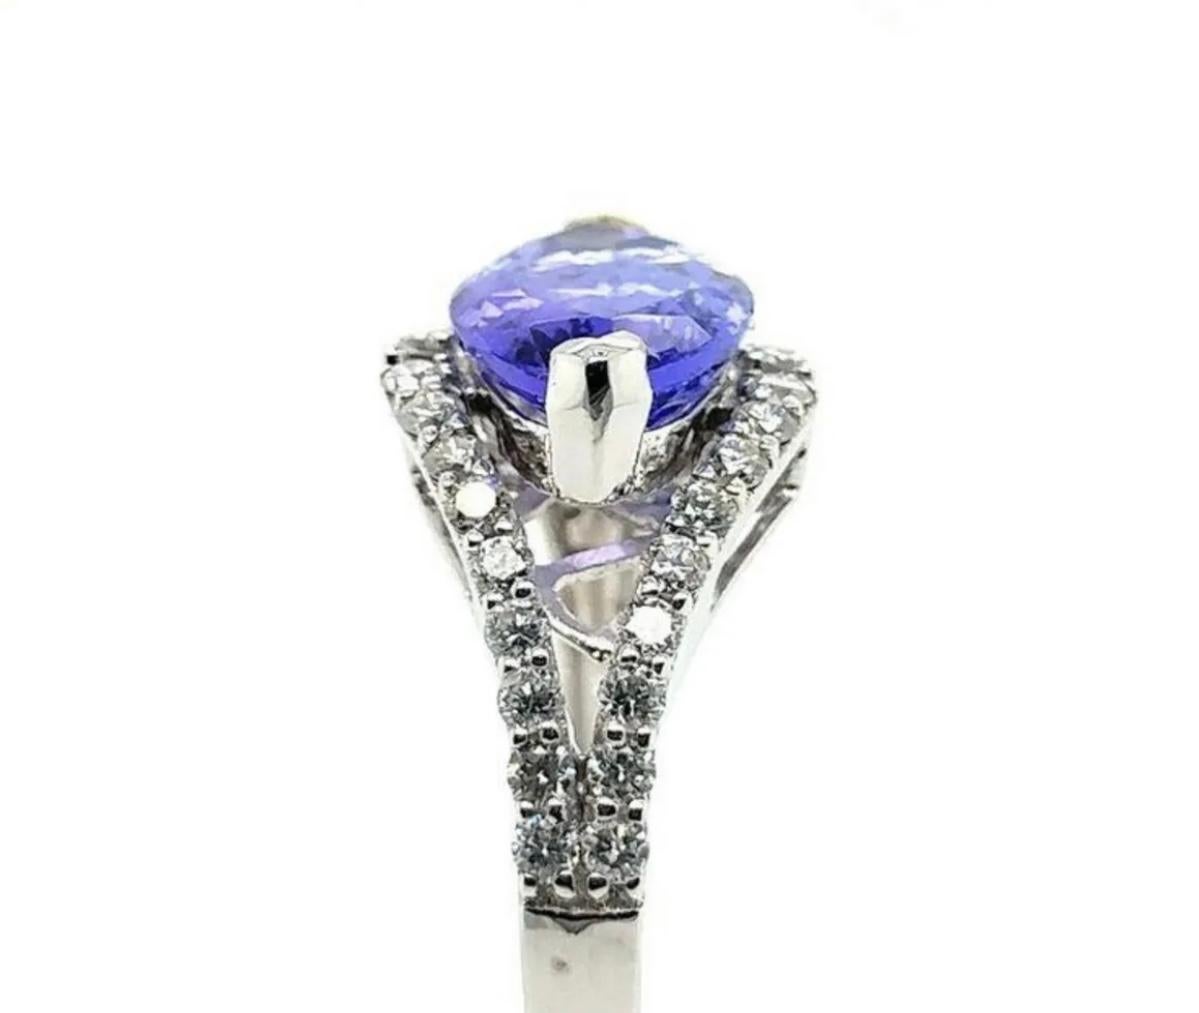 Stunning 18k white gold tanzanite and diamond ring. Size 7, weighing 28.1g, this ring is certified and appraised for $8530 (certification/appraisal included). The East-West set 2.42 carat marquise-cut tanzanite is prong set between .39 carats of